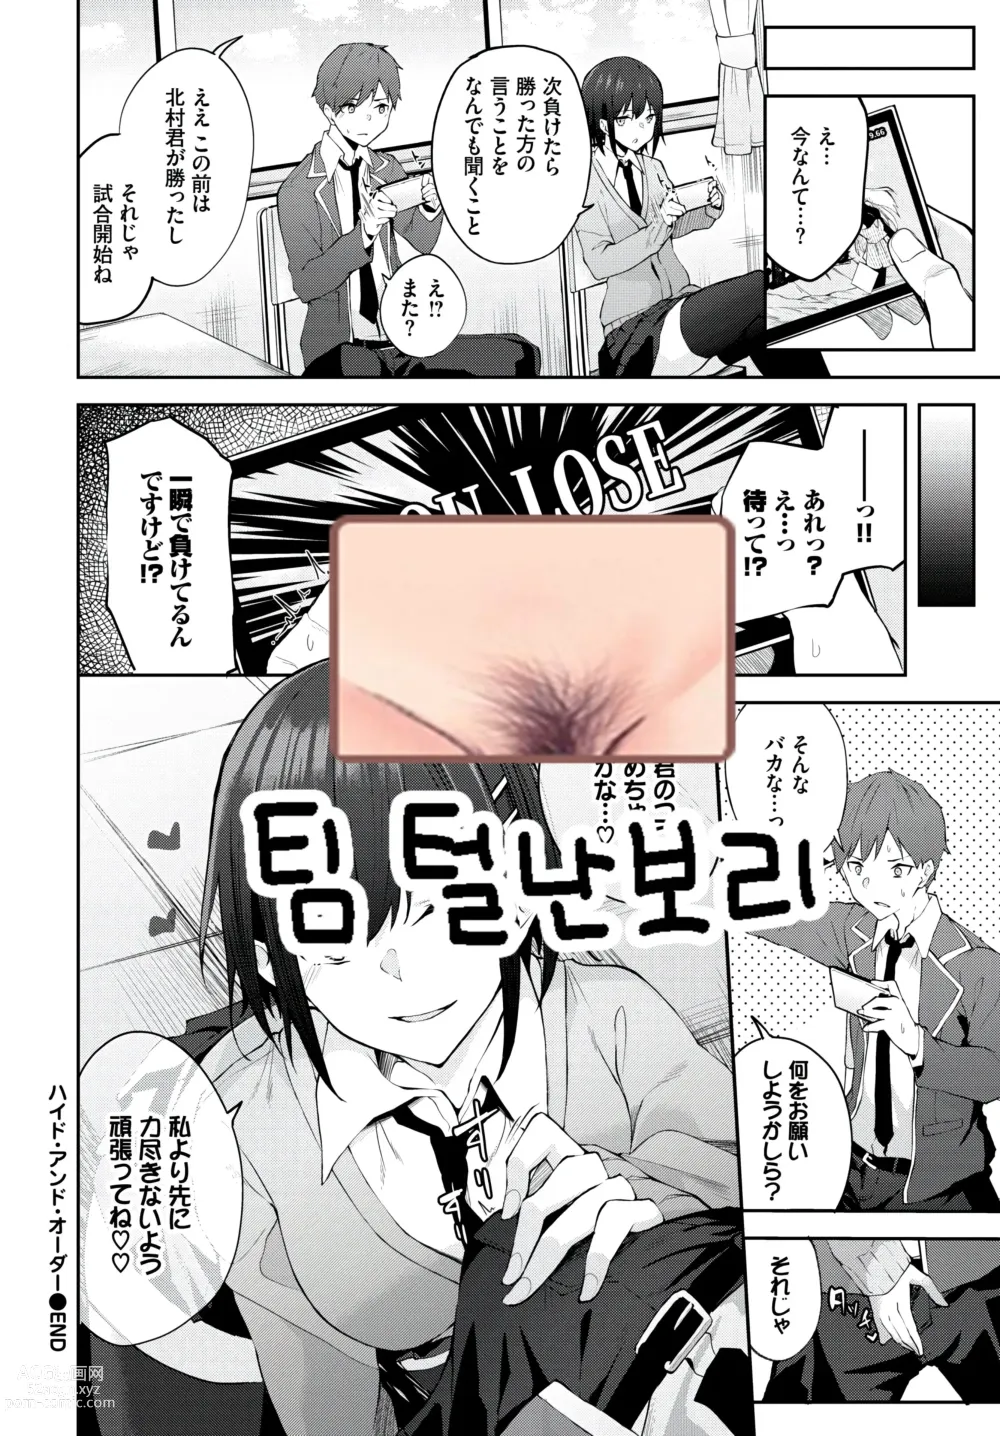 Page 21 of manga Hide and Order